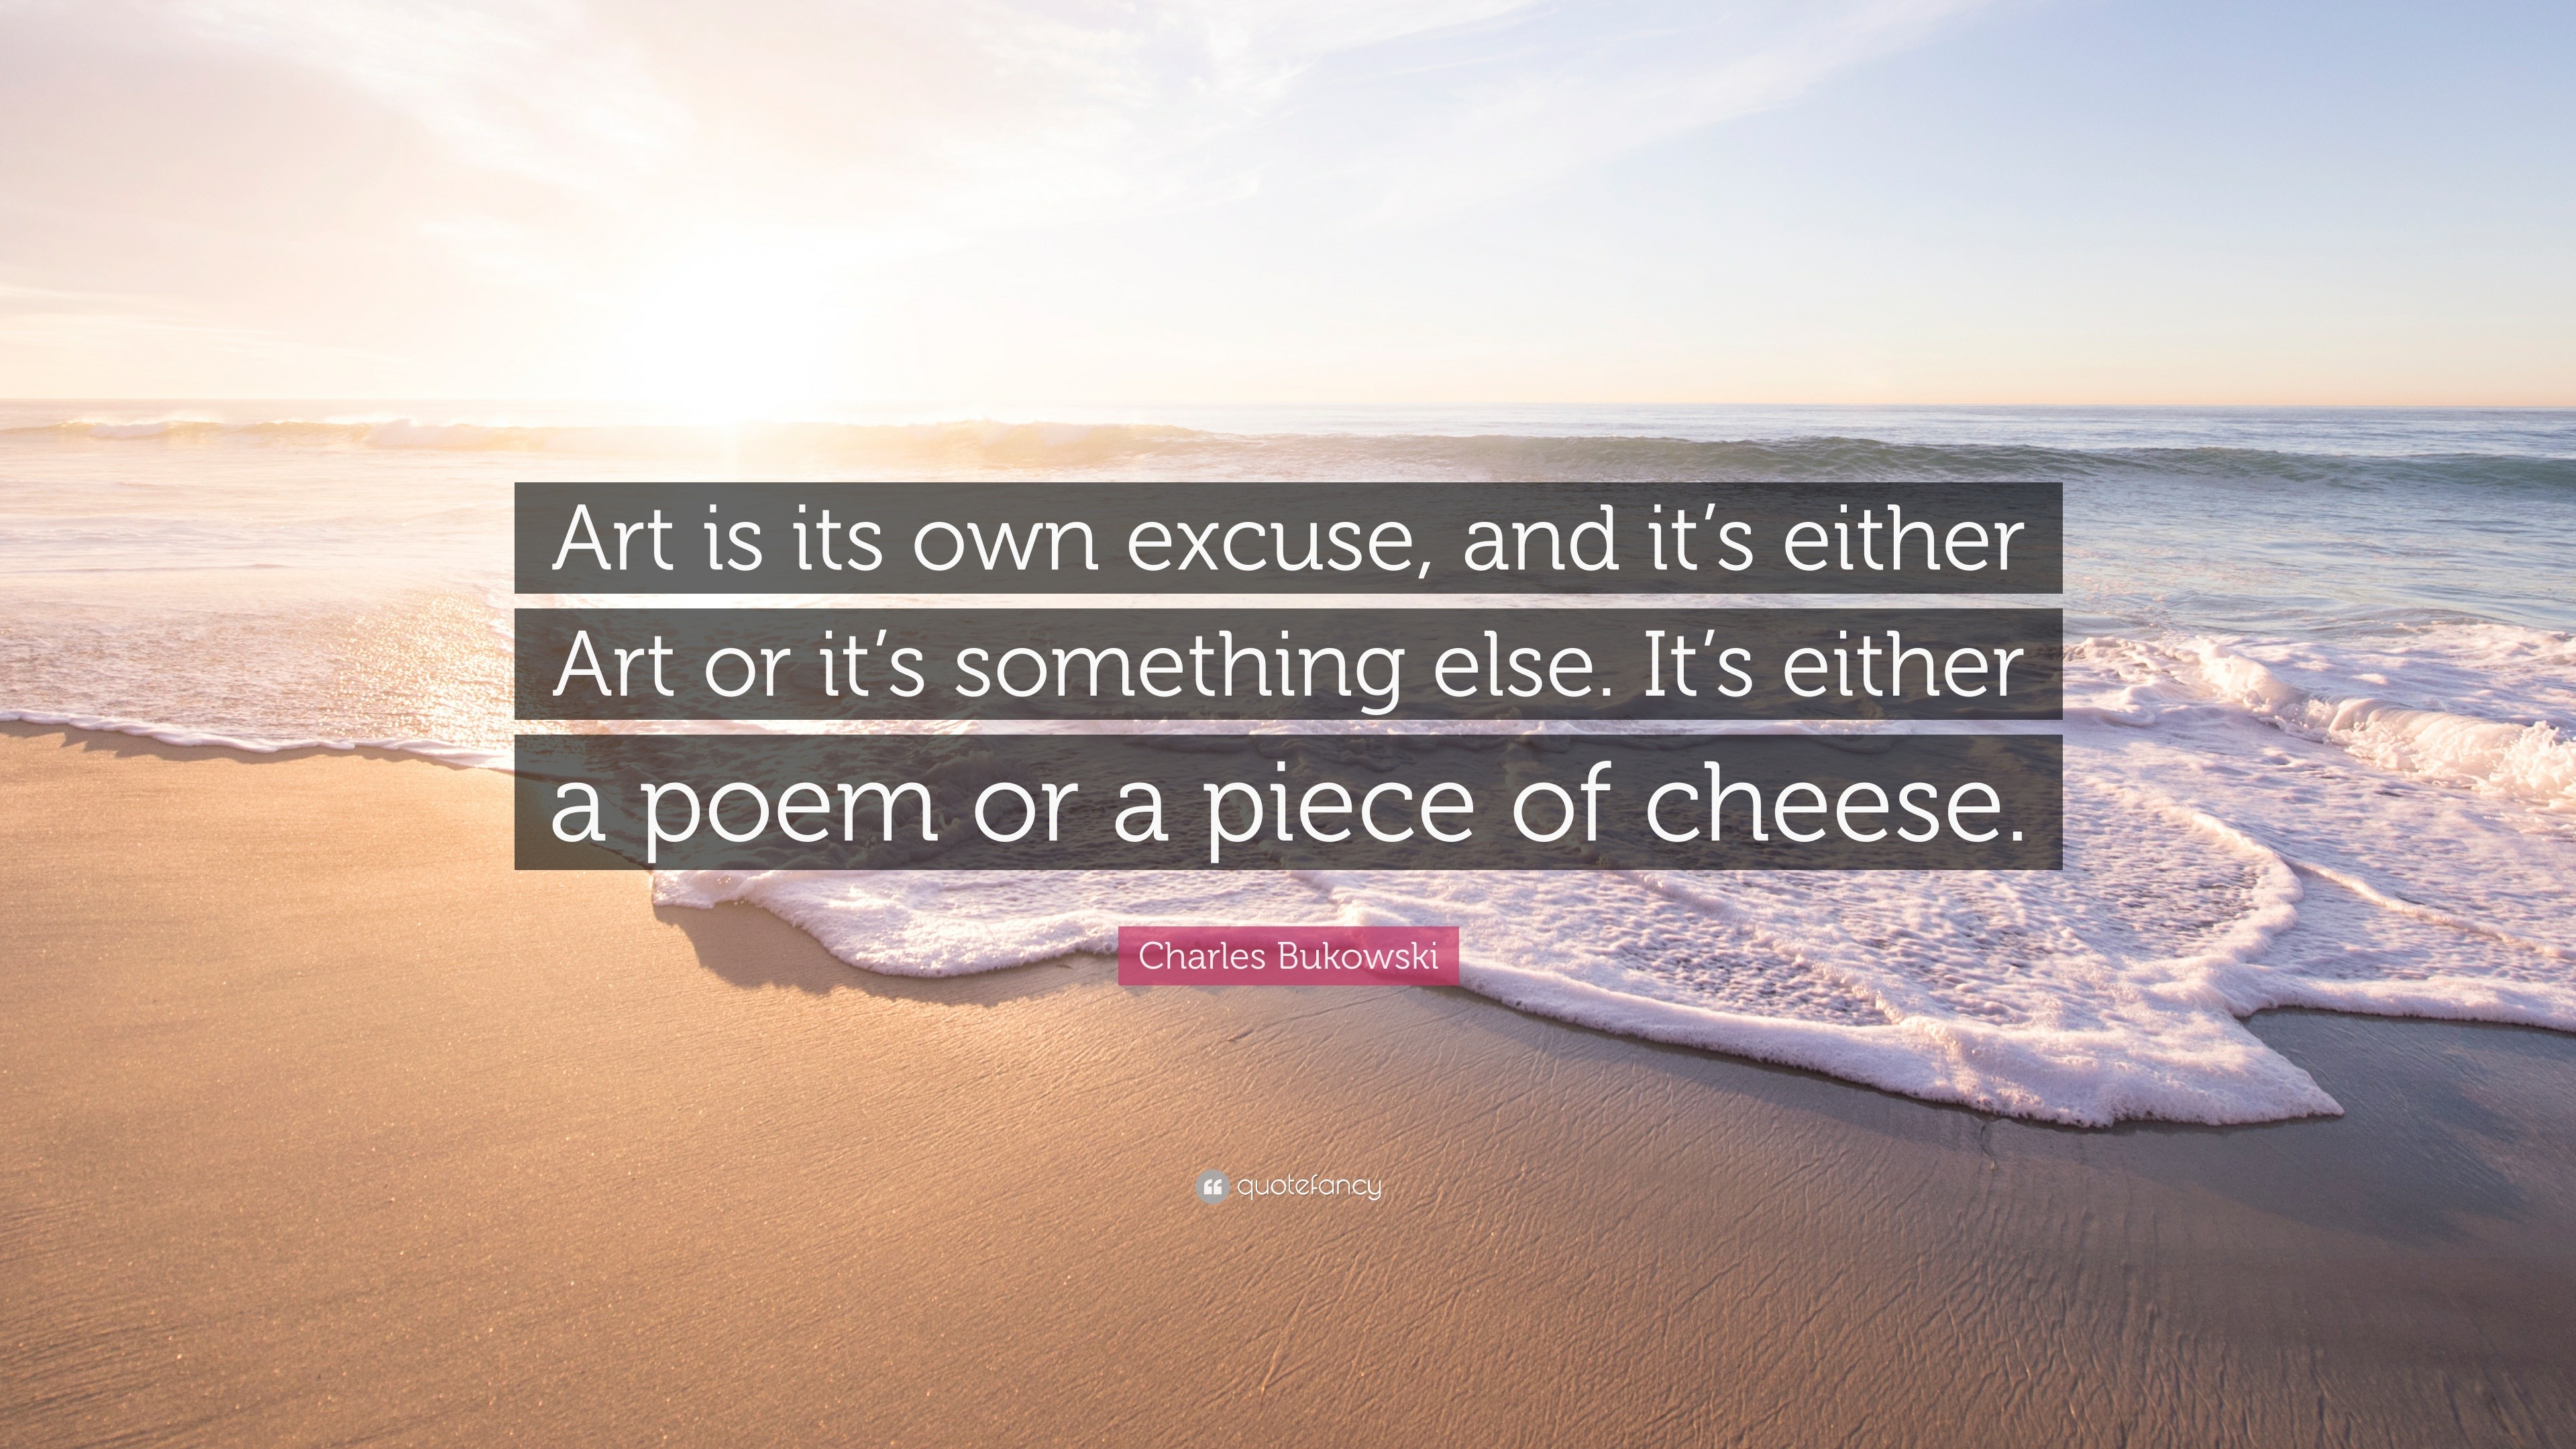 Charles Bukowski Quote: “Art is its own excuse, and it's either